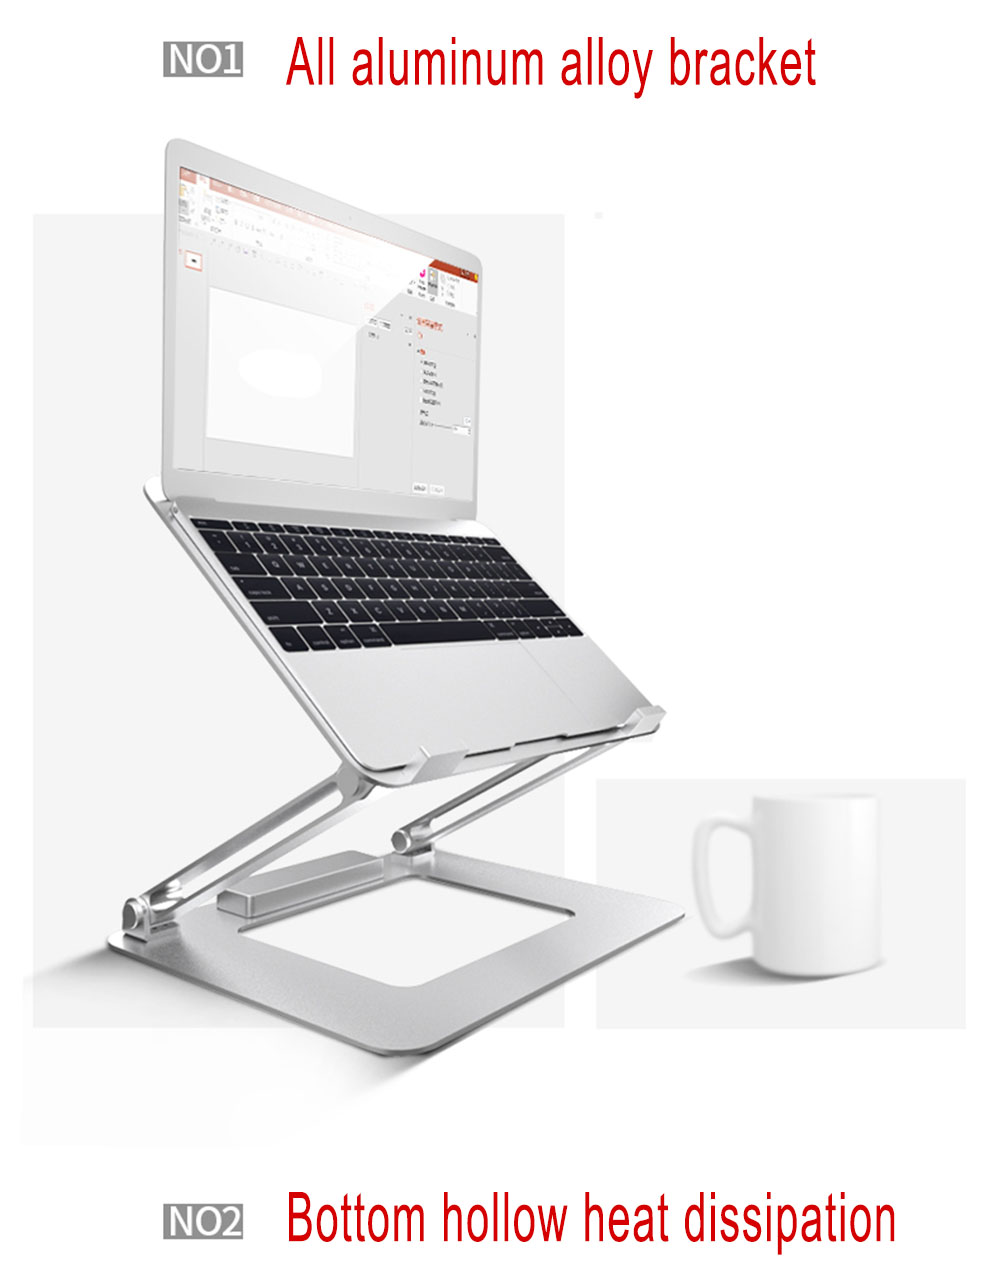 iDock-N37-3-Laptop-Stand-with-USB-30-Interface-Portable-Bracket-Foldable-Aluminum-Alloy-Computer-Hea-1725642-1